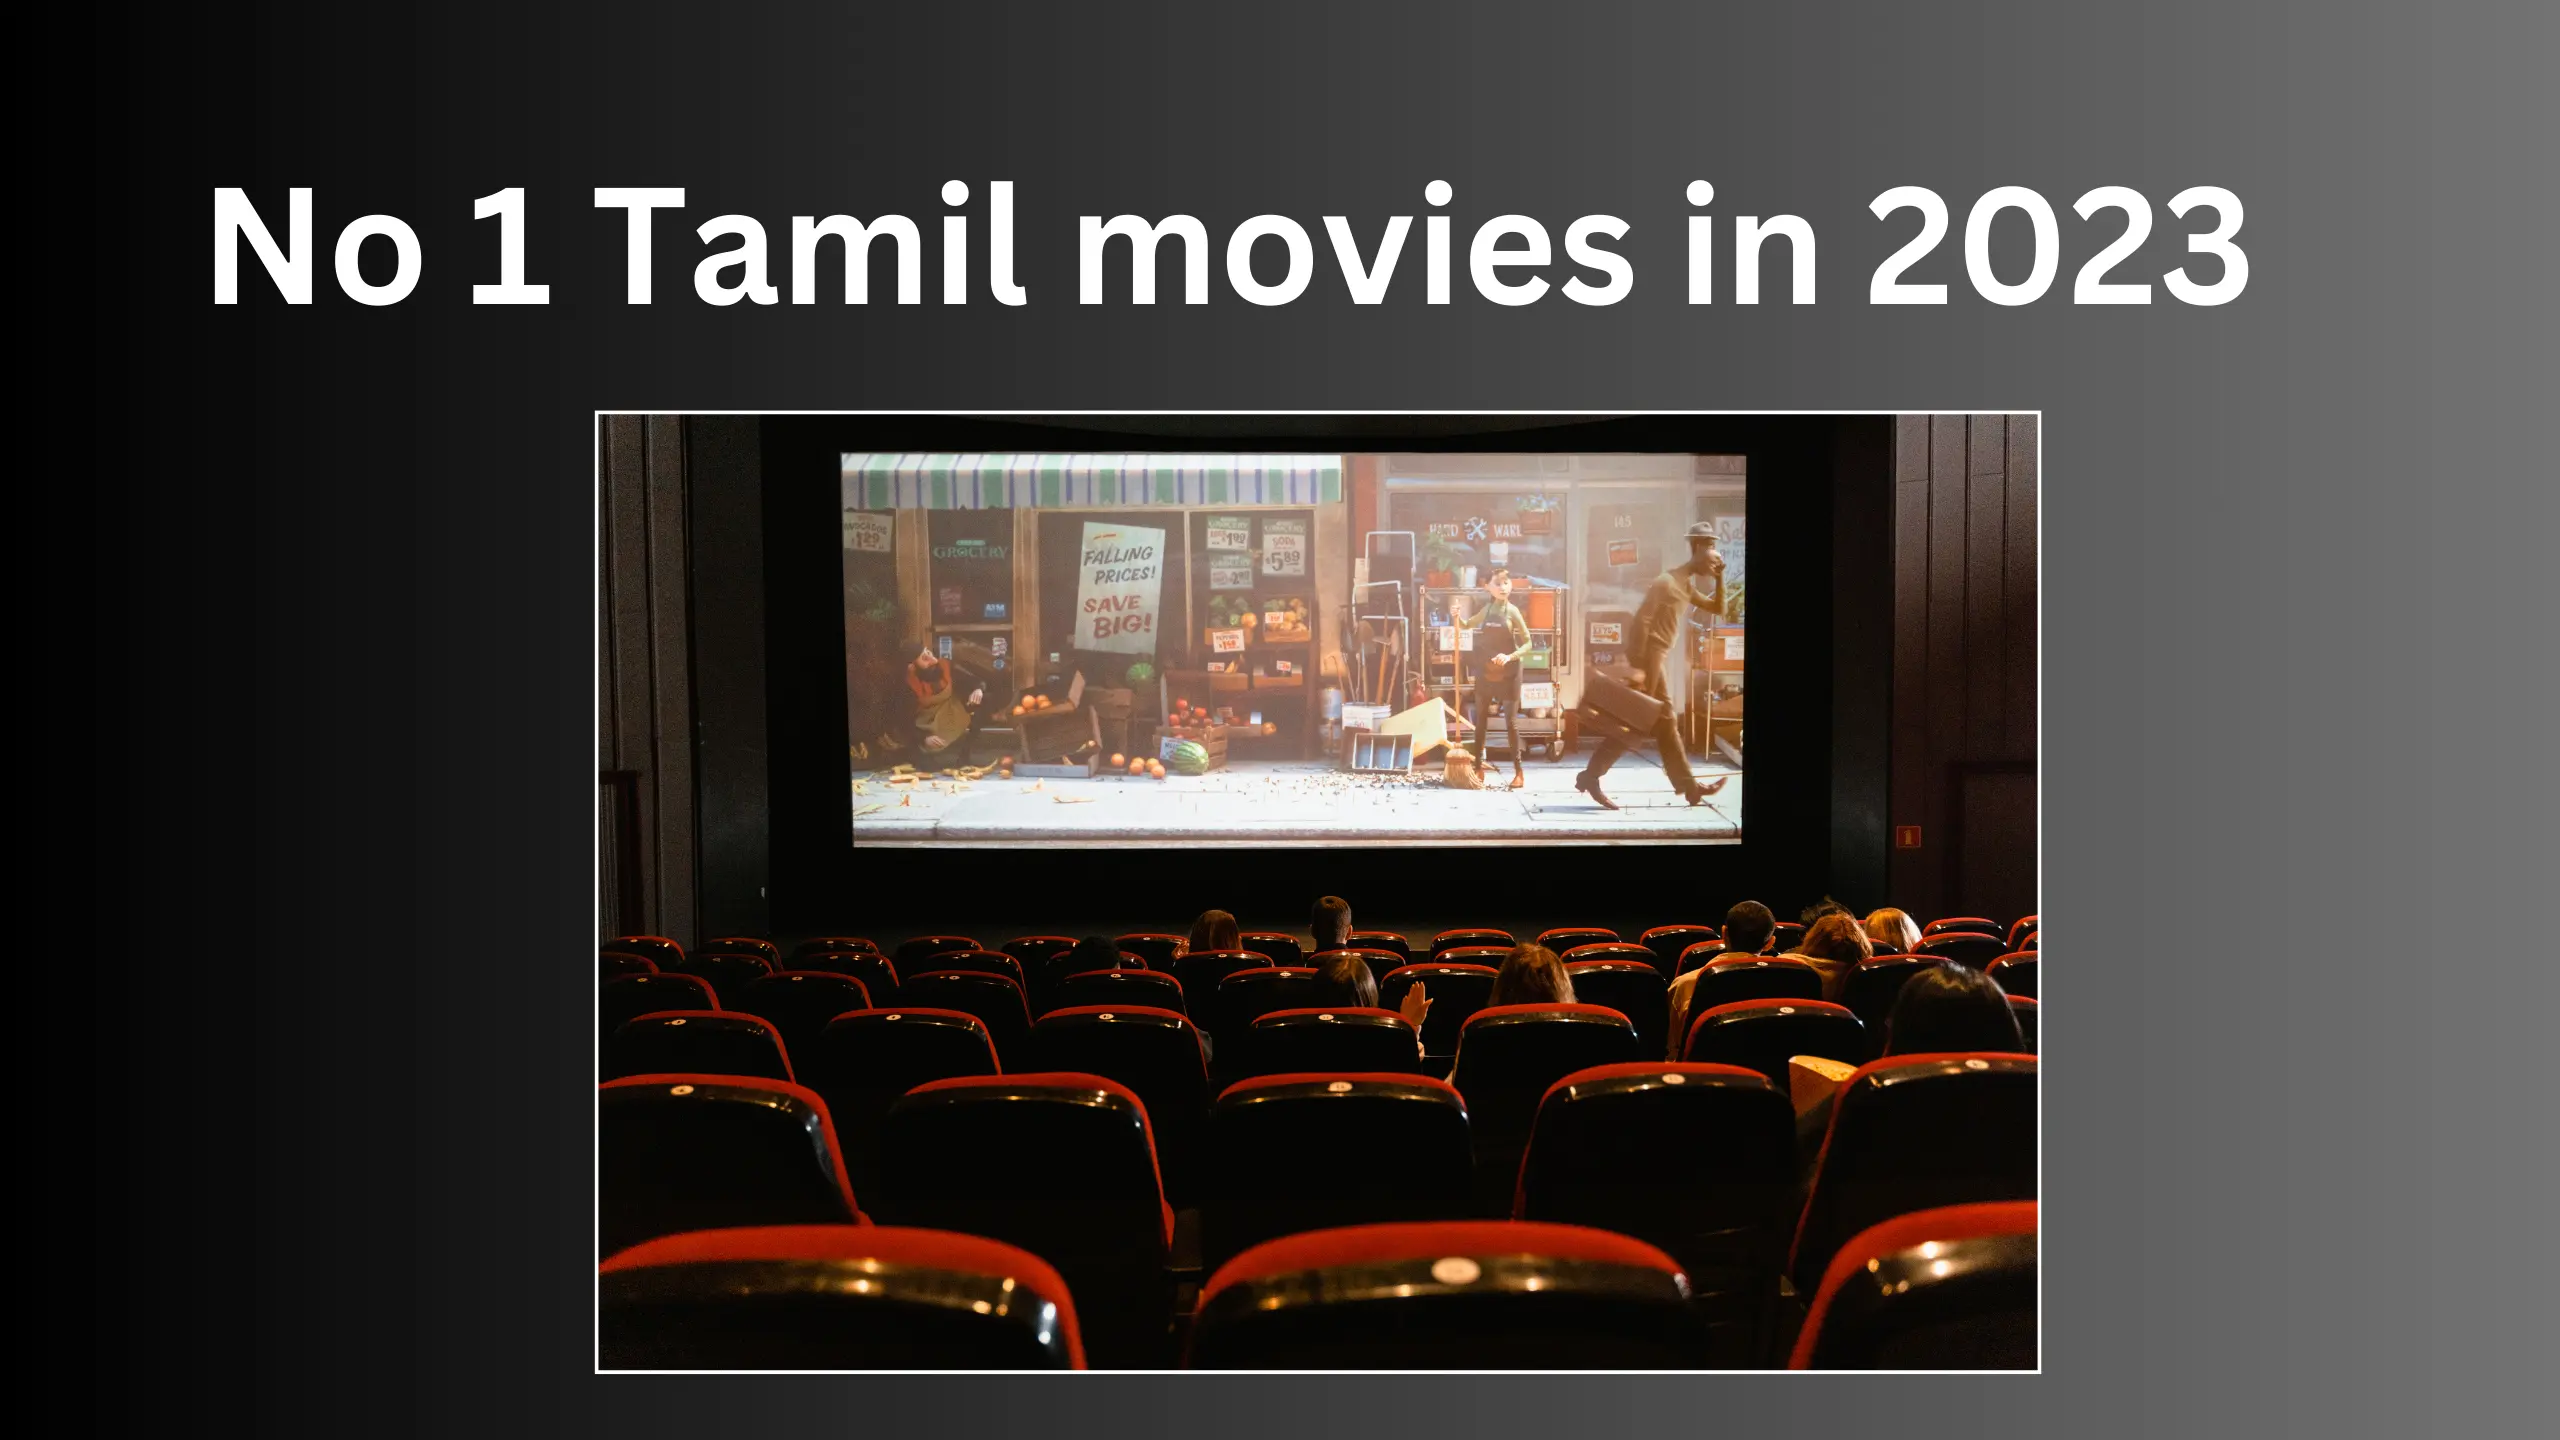 No 1 Tamil movies in 2023